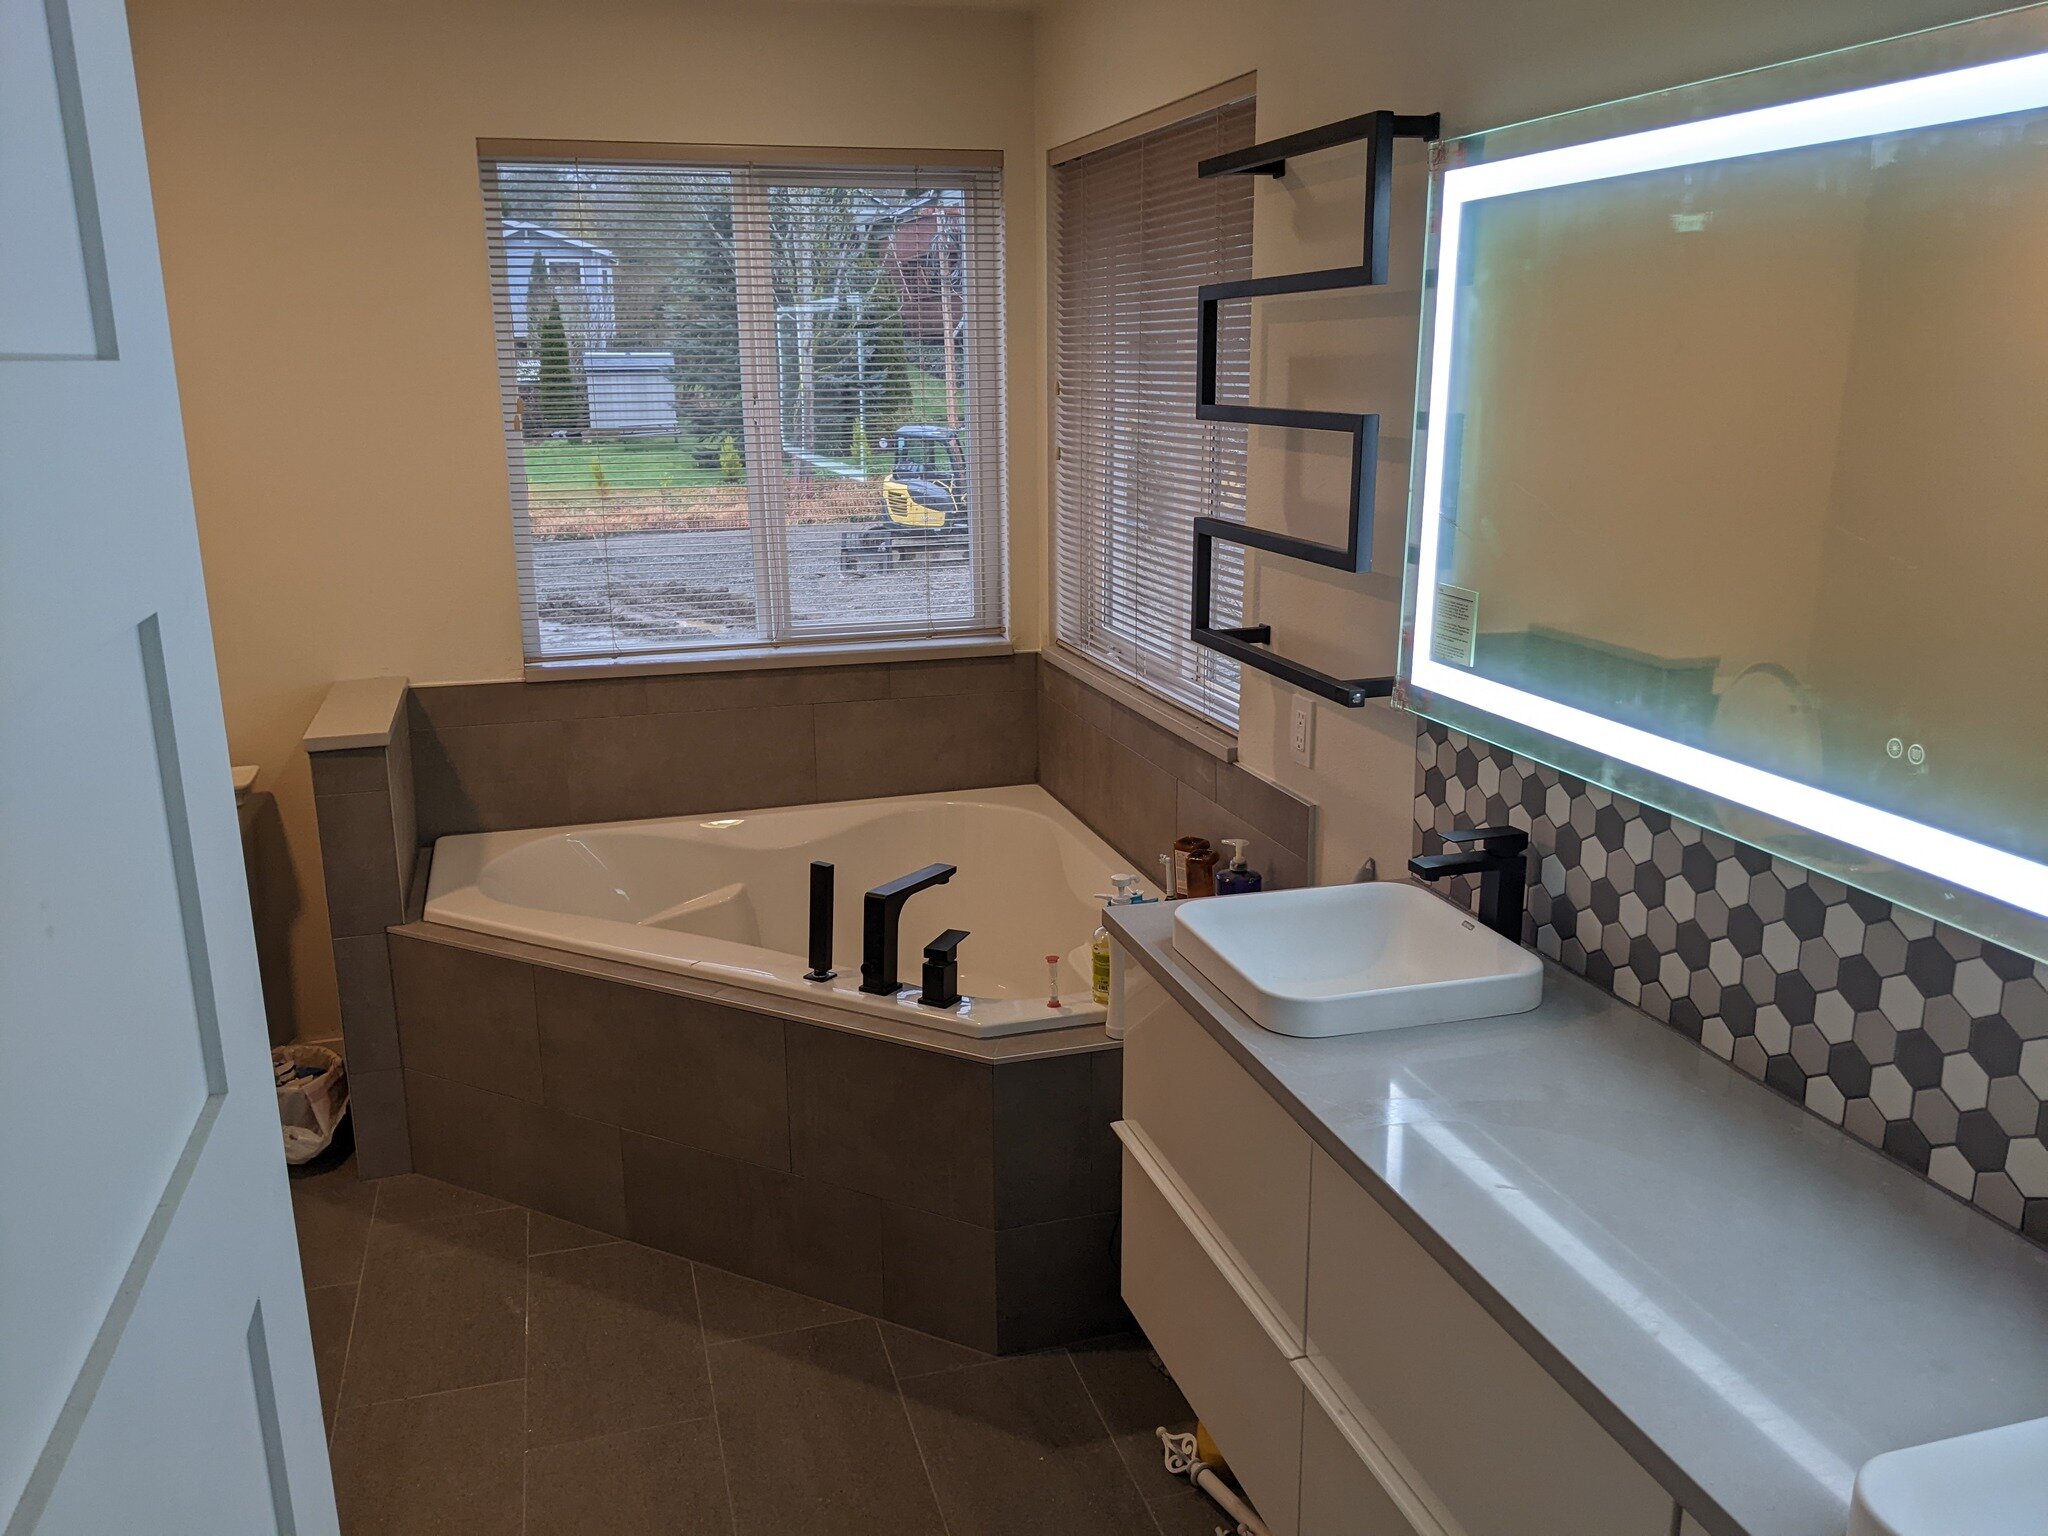 ✨ Bathroom Glow-up! ✨ Swipe for the stunning before &amp; after. From outdated to oasis. 🚿✨ Experience comfort in every detail. Functional elegance at its finest. Client-approved!
 #edmondswa #bathroomideas #remodeling #bathrooms #grandresidence #se